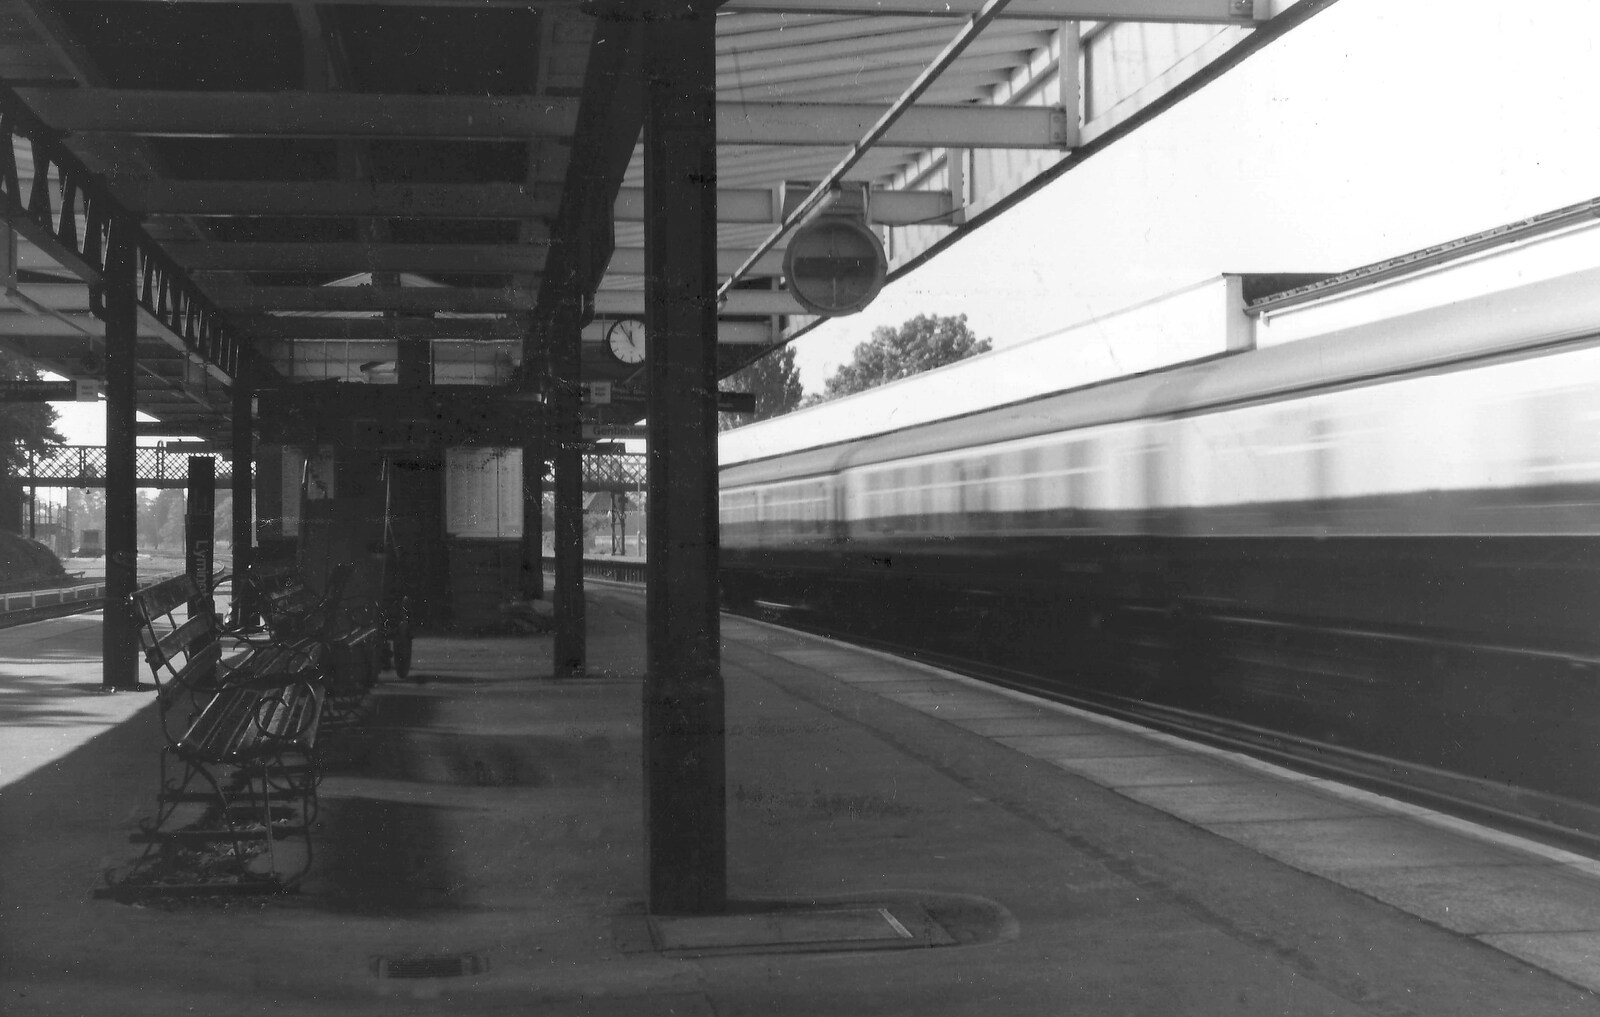 The 92 train from Bournemouth pulls in to Brock station from Learning Black-and-White Photography, Brockenhurst College, Hampshire - 10th March 1985